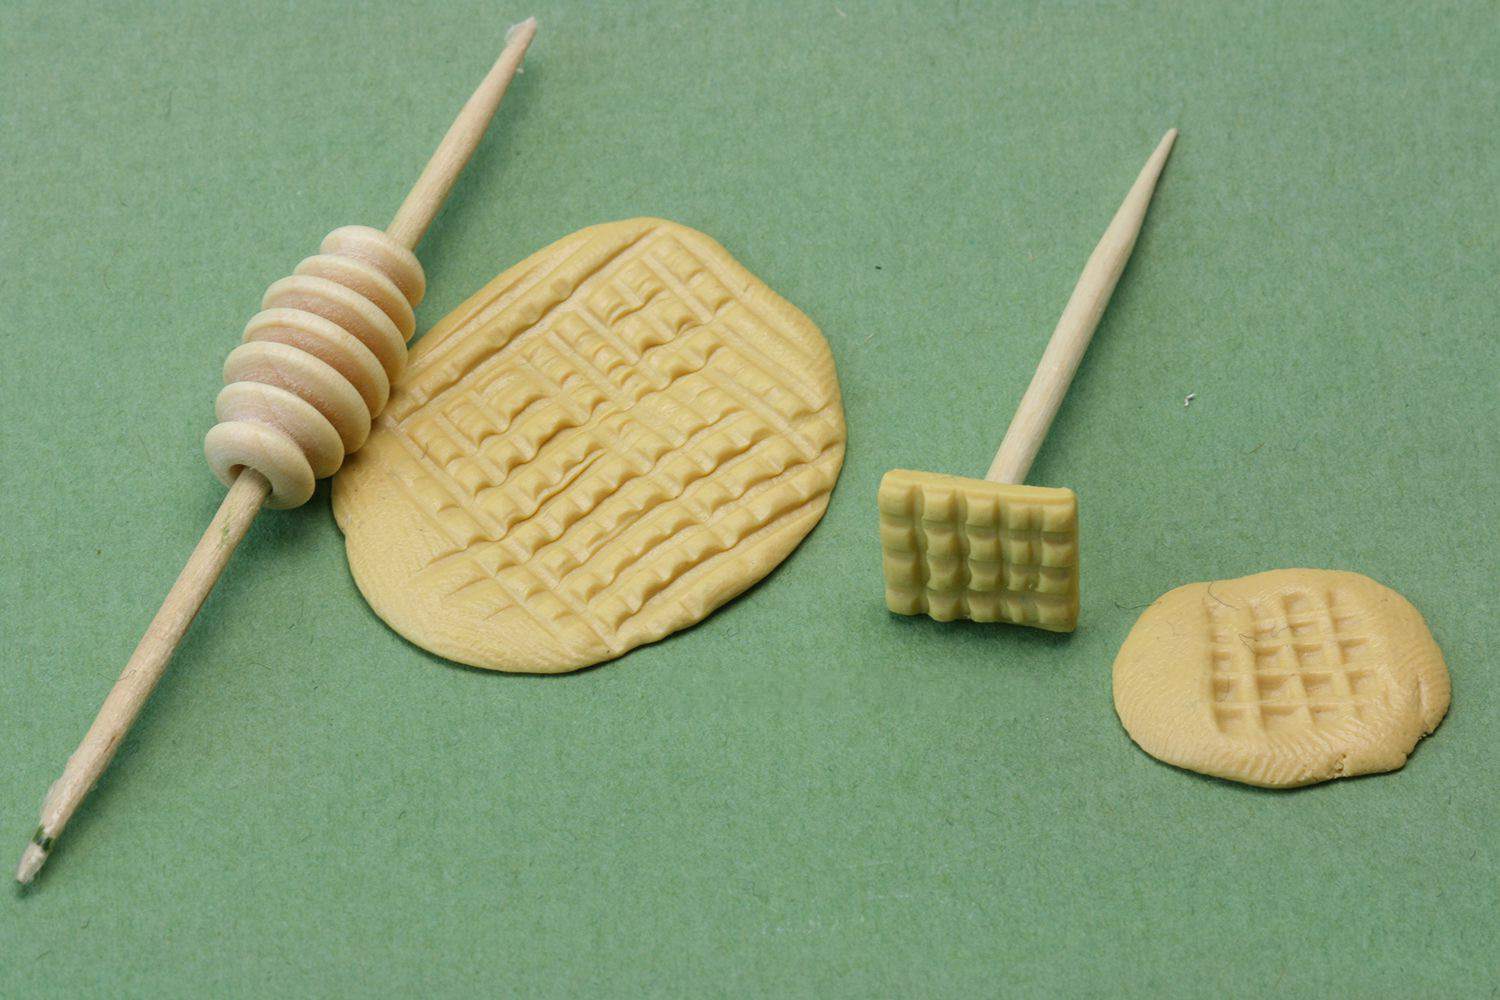 Ridged bead with a toothpick through the centre acts as a miniature rolling pin